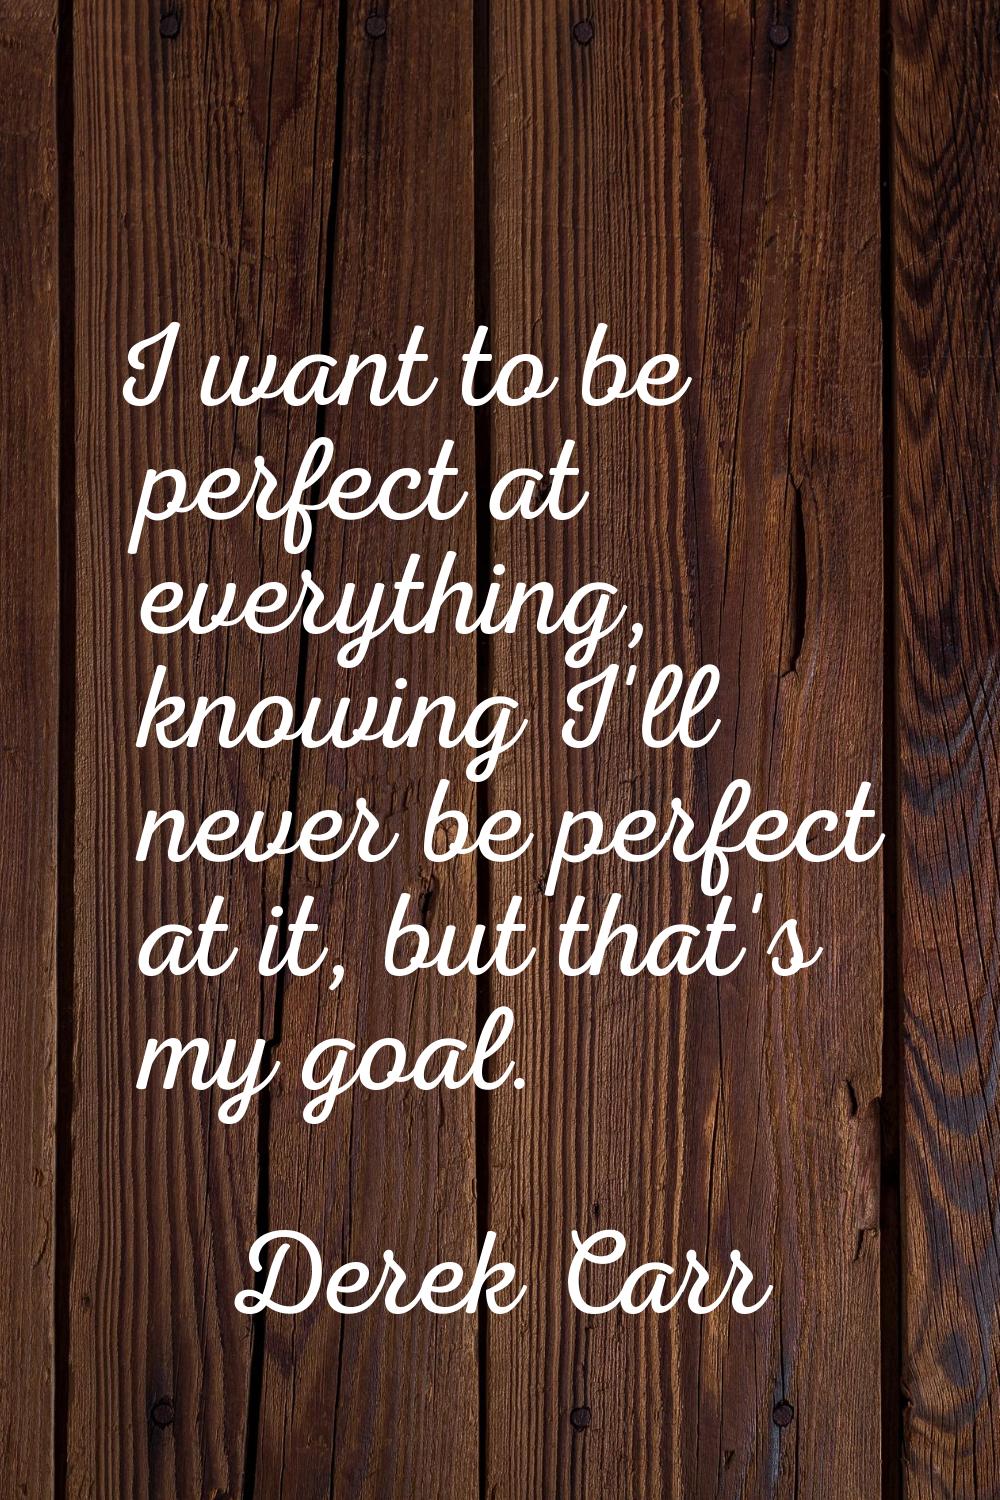 I want to be perfect at everything, knowing I'll never be perfect at it, but that's my goal.